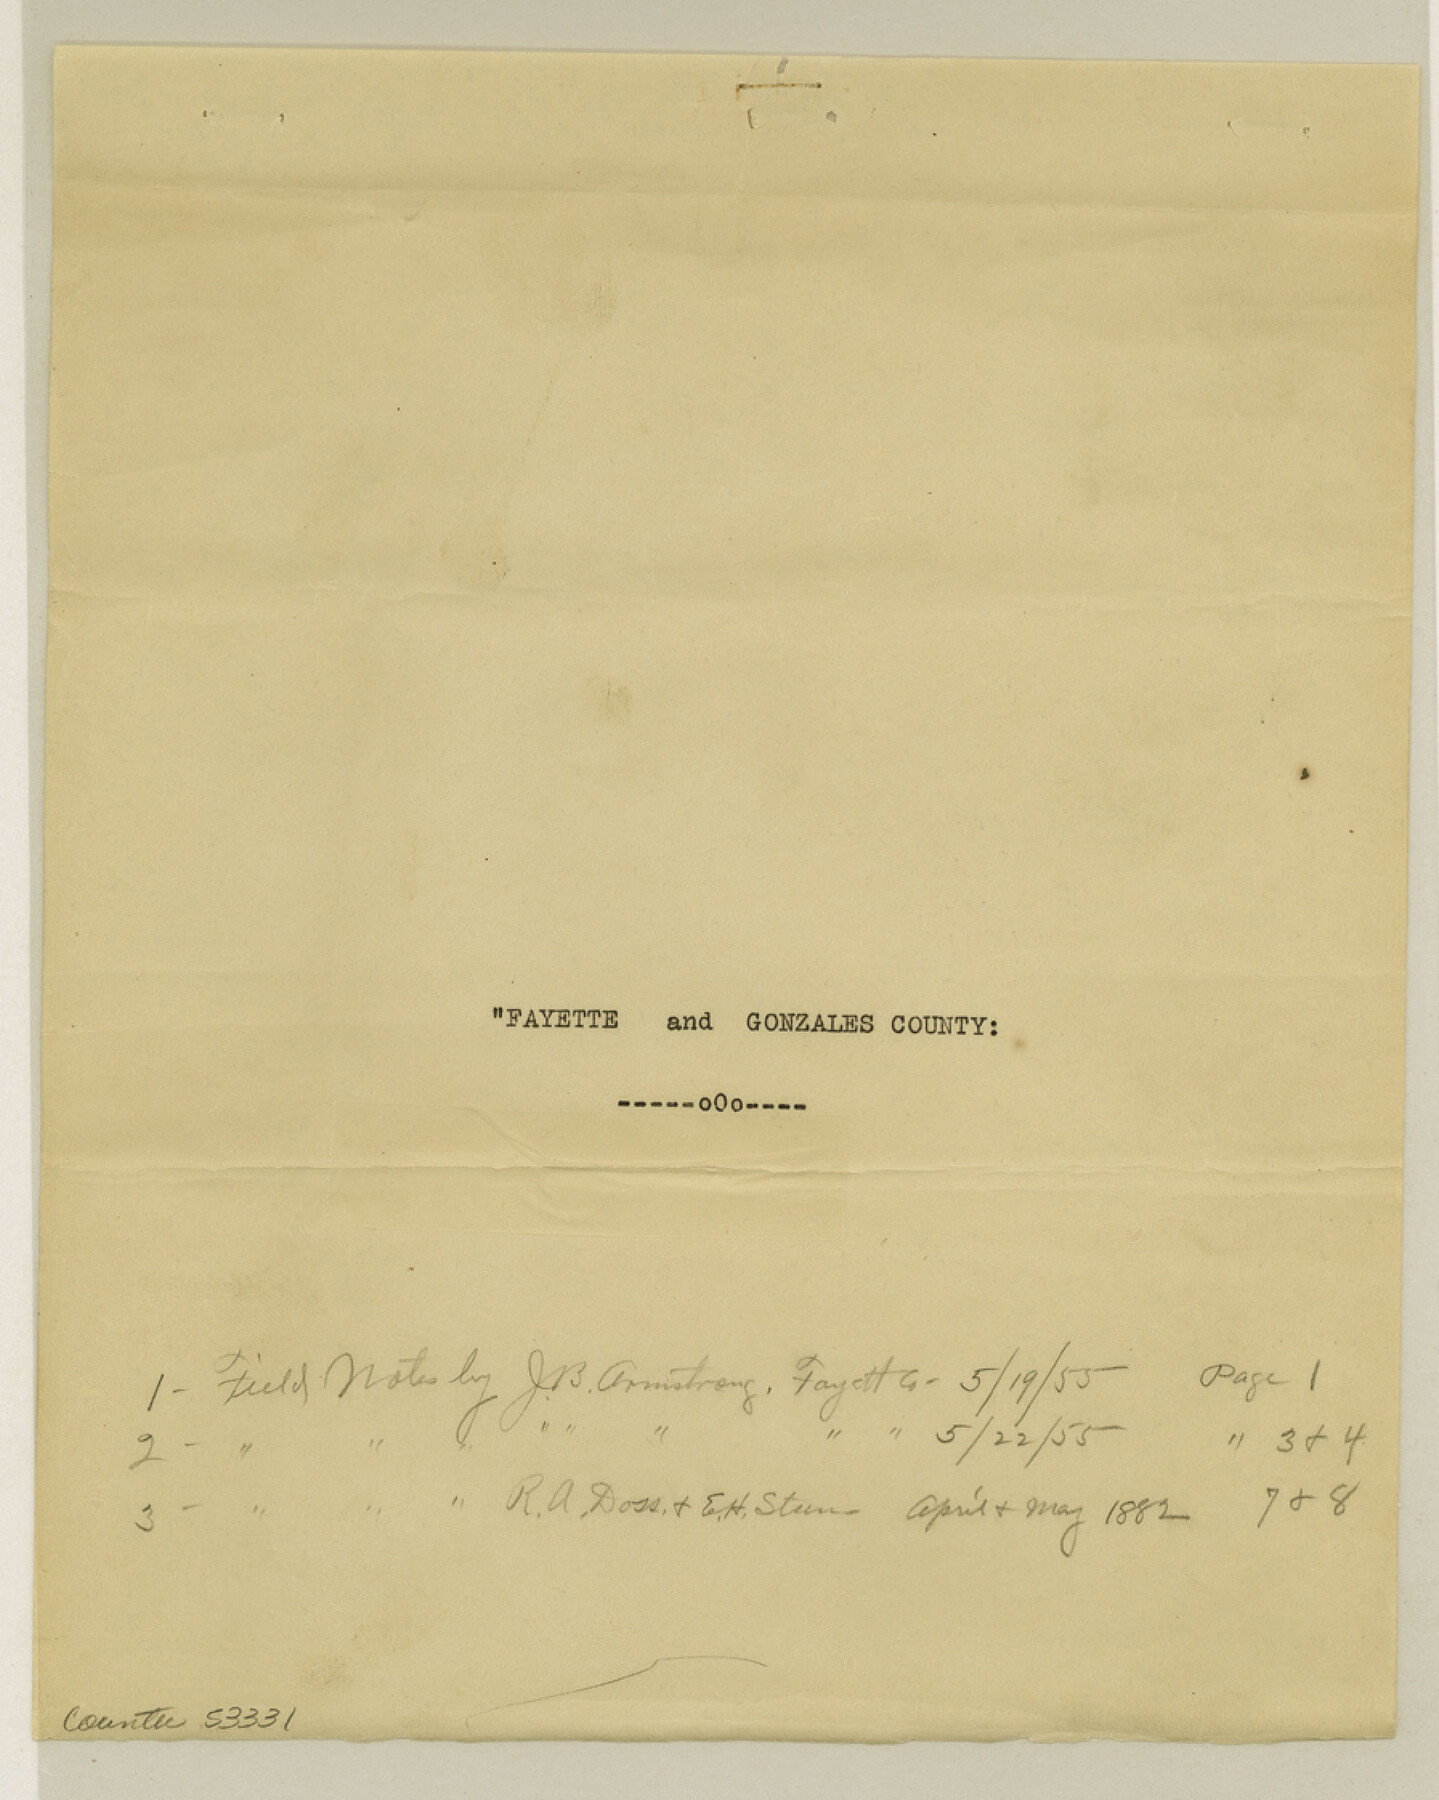 53331, Fayette County Boundary File 2, General Map Collection